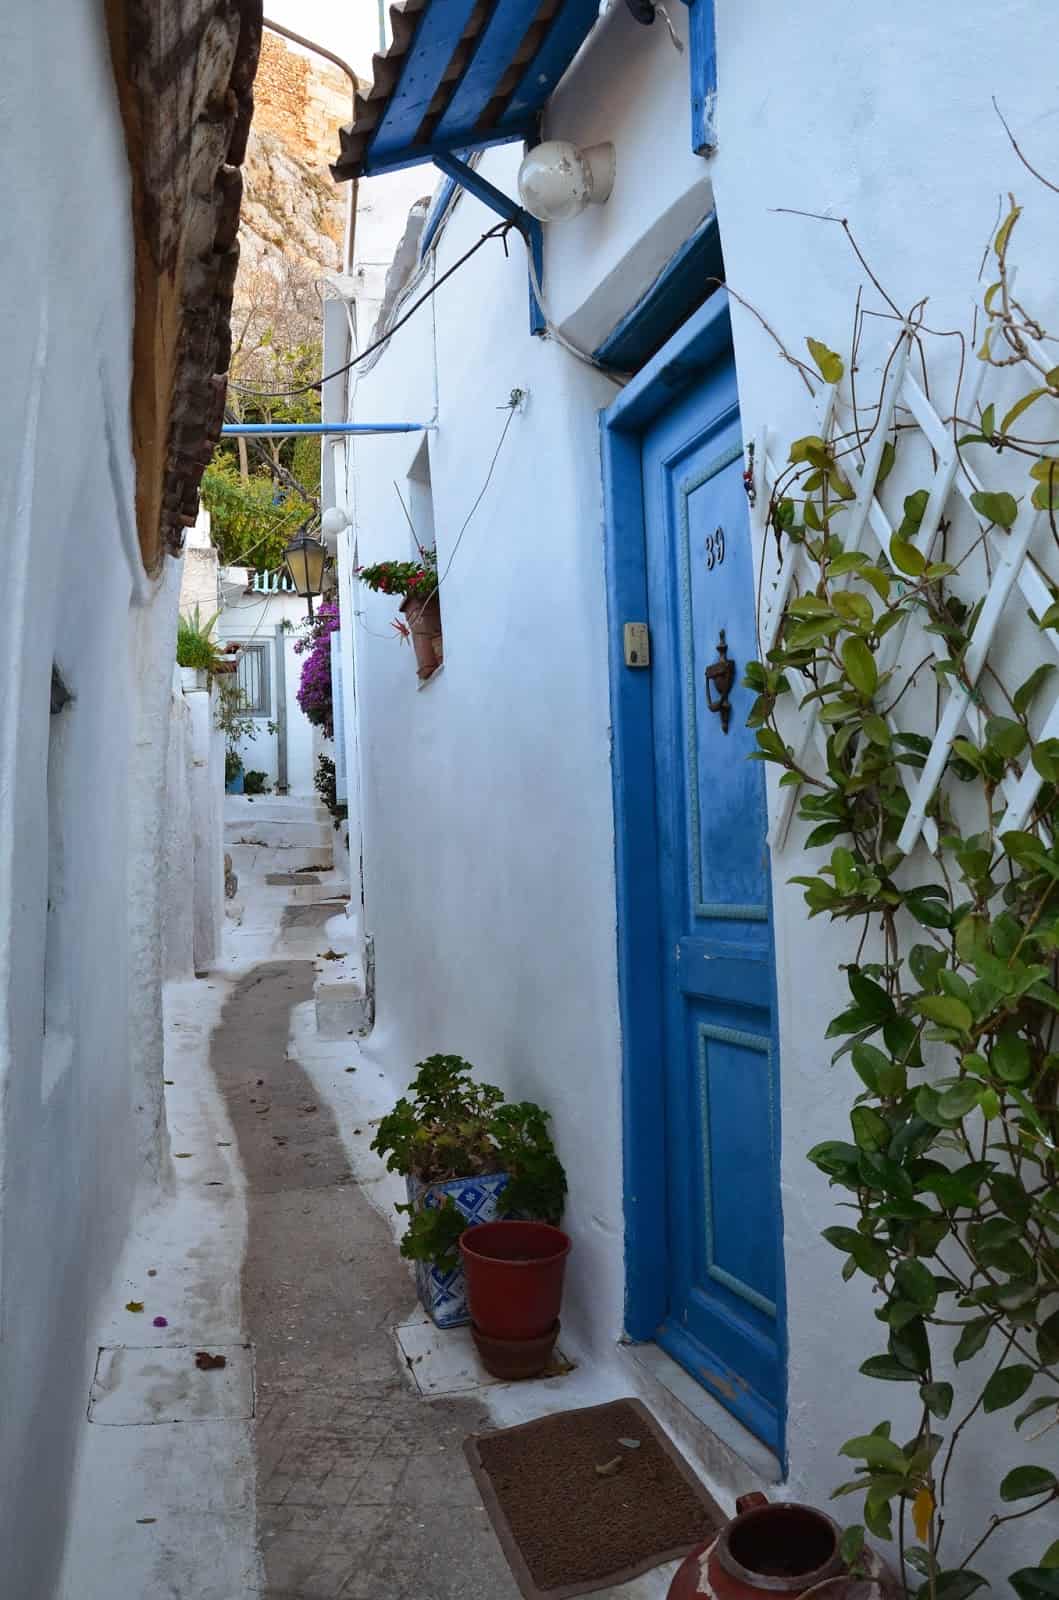 An alley with whitewashed homes in Anafiotika, Athens, Greece